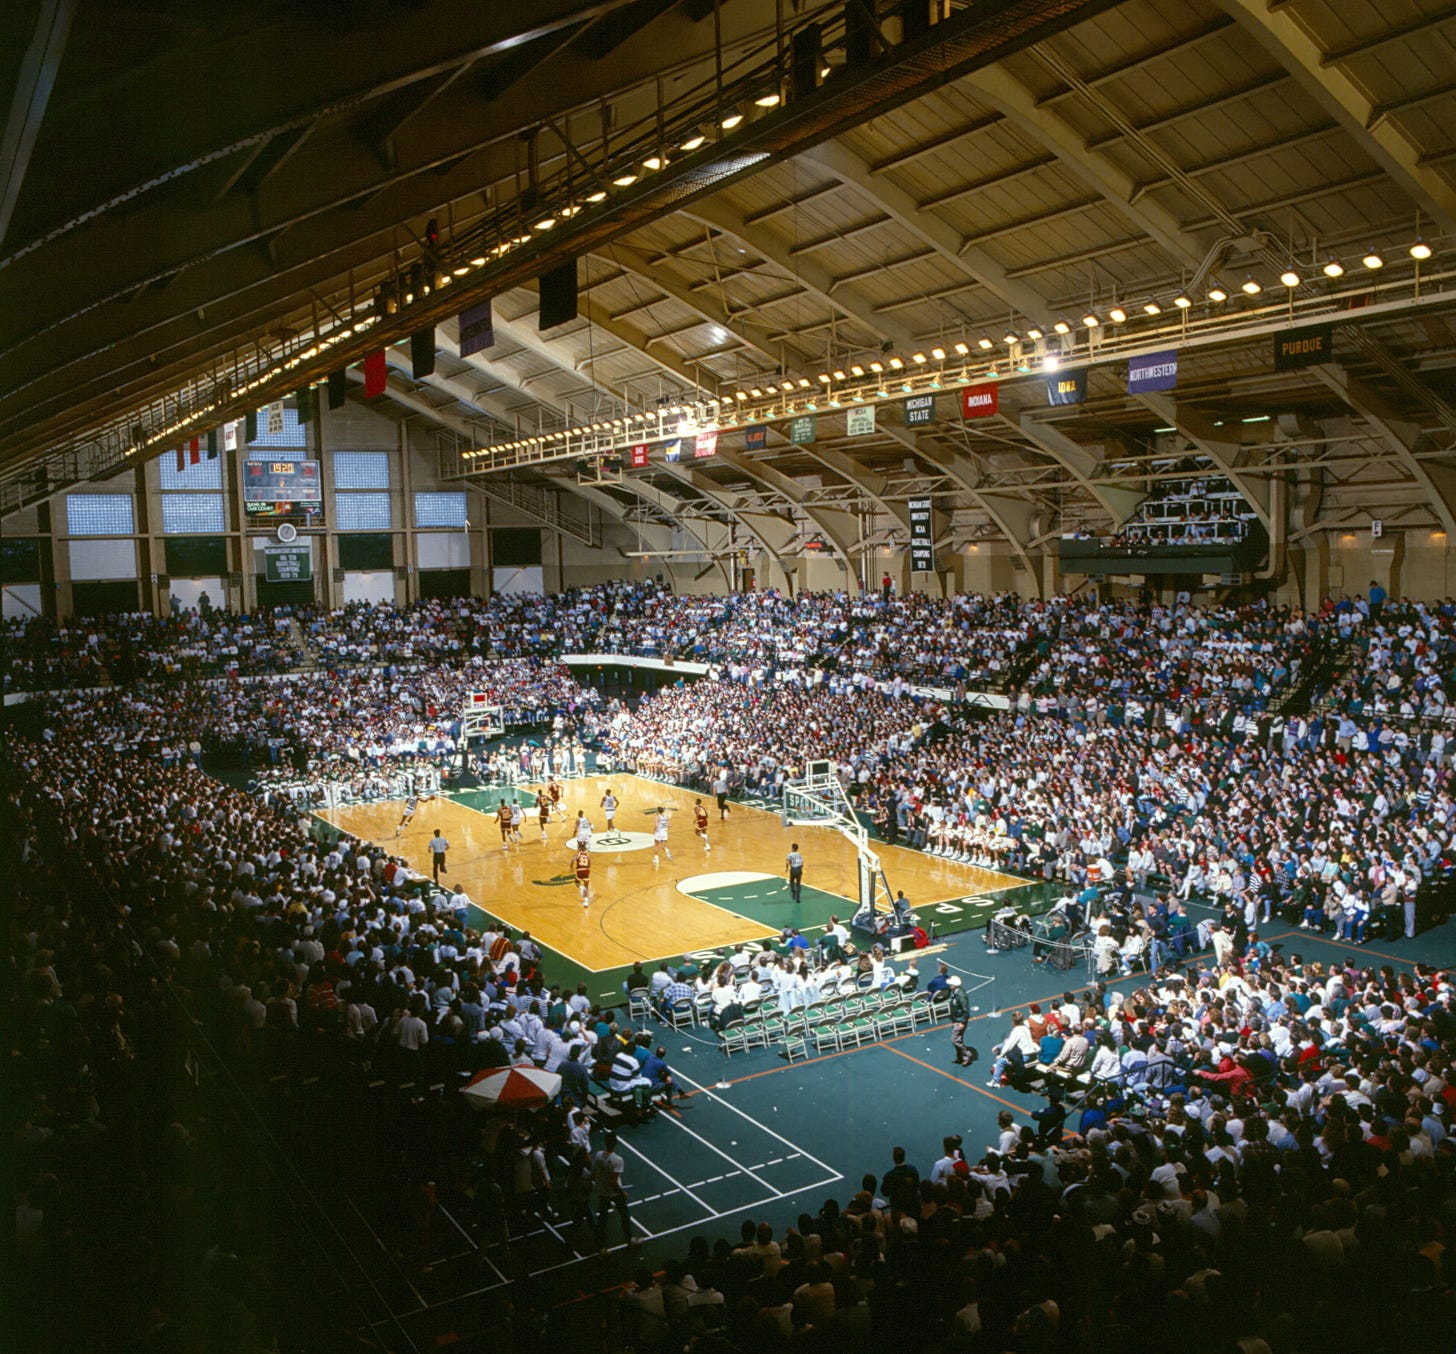 Jenison Field House was the home for Spartan basketball for 50 seasons from 1940-89.